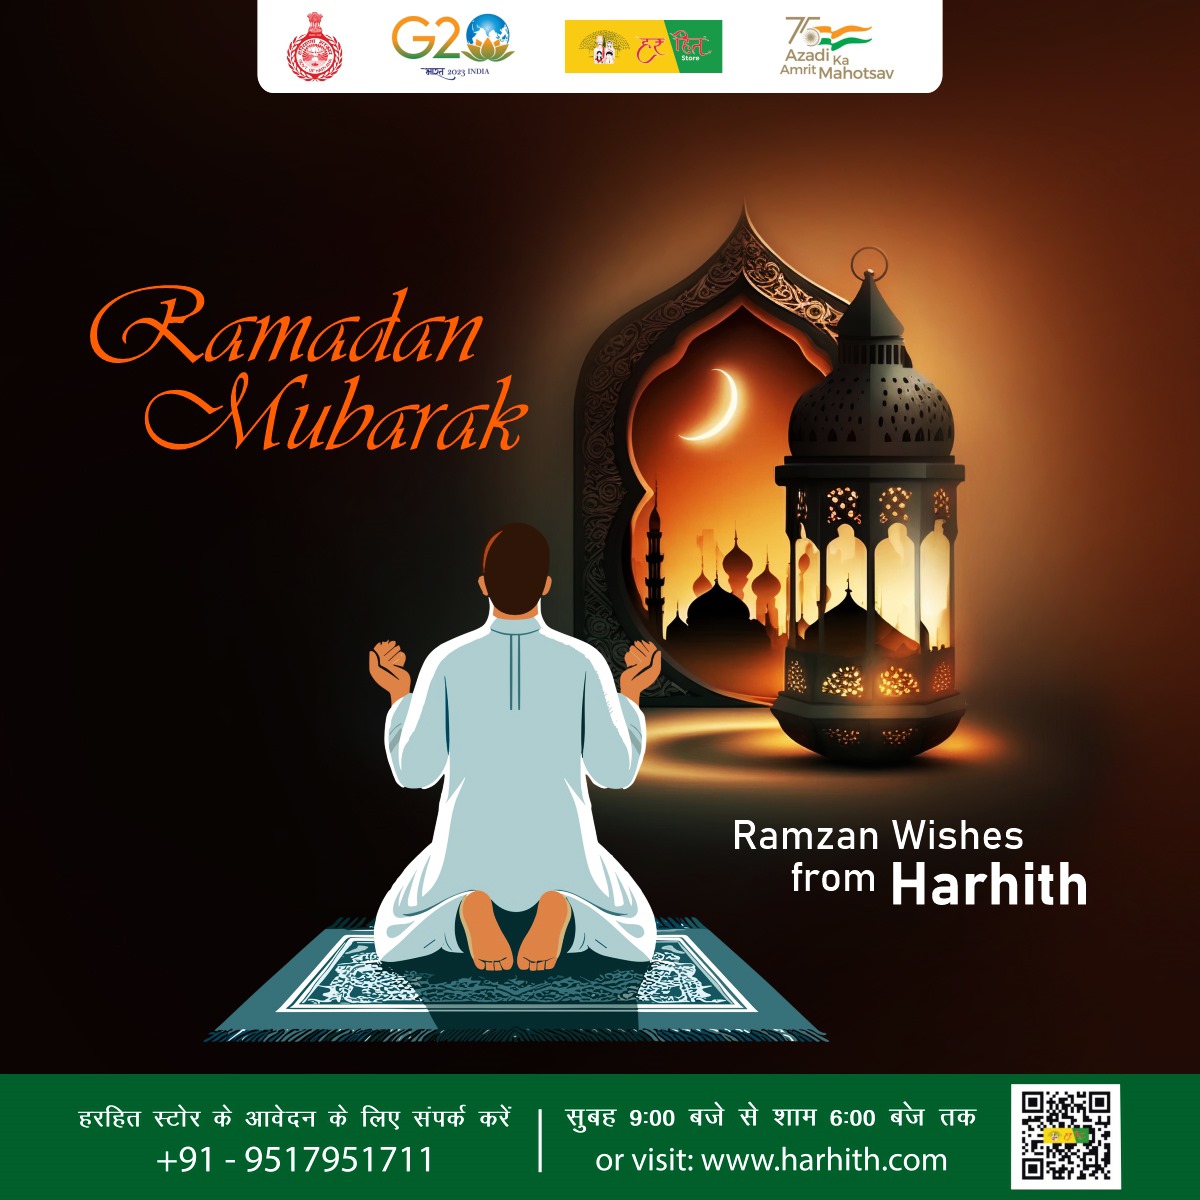 Harhith Wishes you a blessed Ramazan filled with peace, reflection, and spiritual growth. Ramazan Mubarak!
.
.
#groceryshopping #haryana #haryanagovenment #grocerystore #retailbussiness #tyoharretail #retailchain #bestbrands #bestvalue #quailty #harhith #harhithstore #franchise